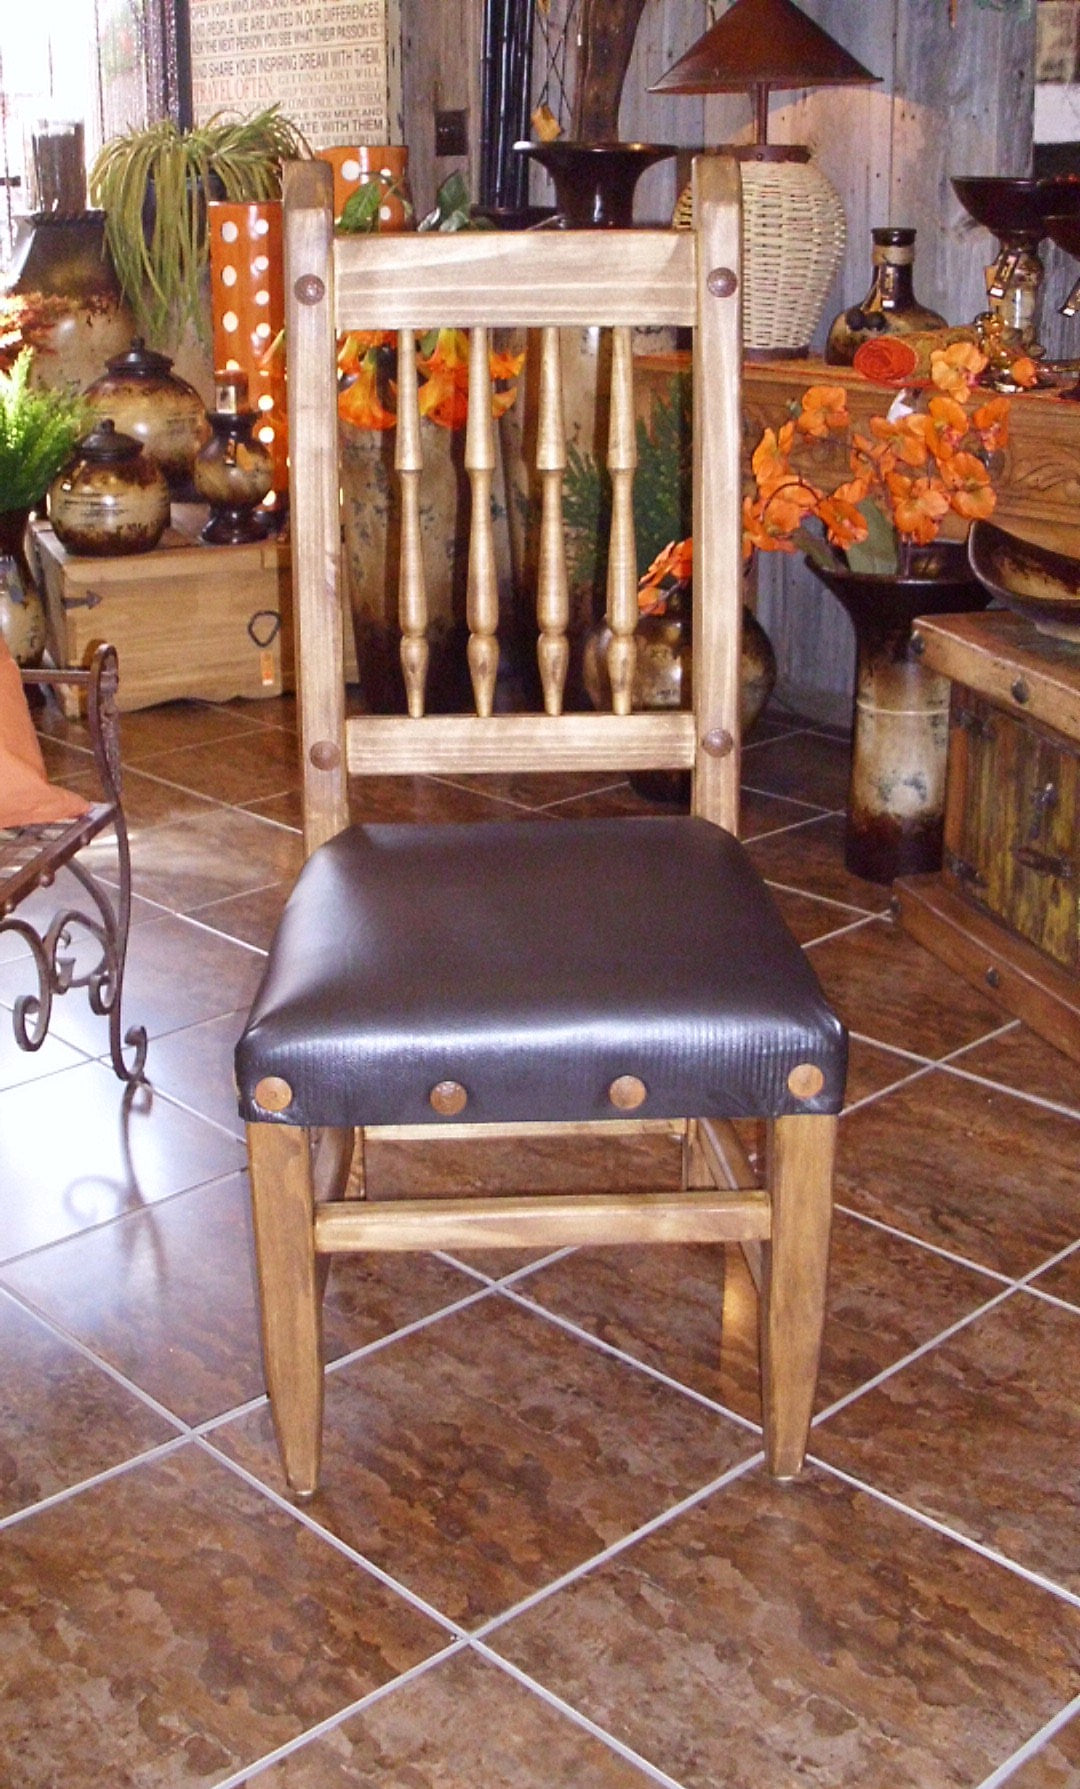 Mexican dining chair with leather seat - Birdie’s Nest Inc 